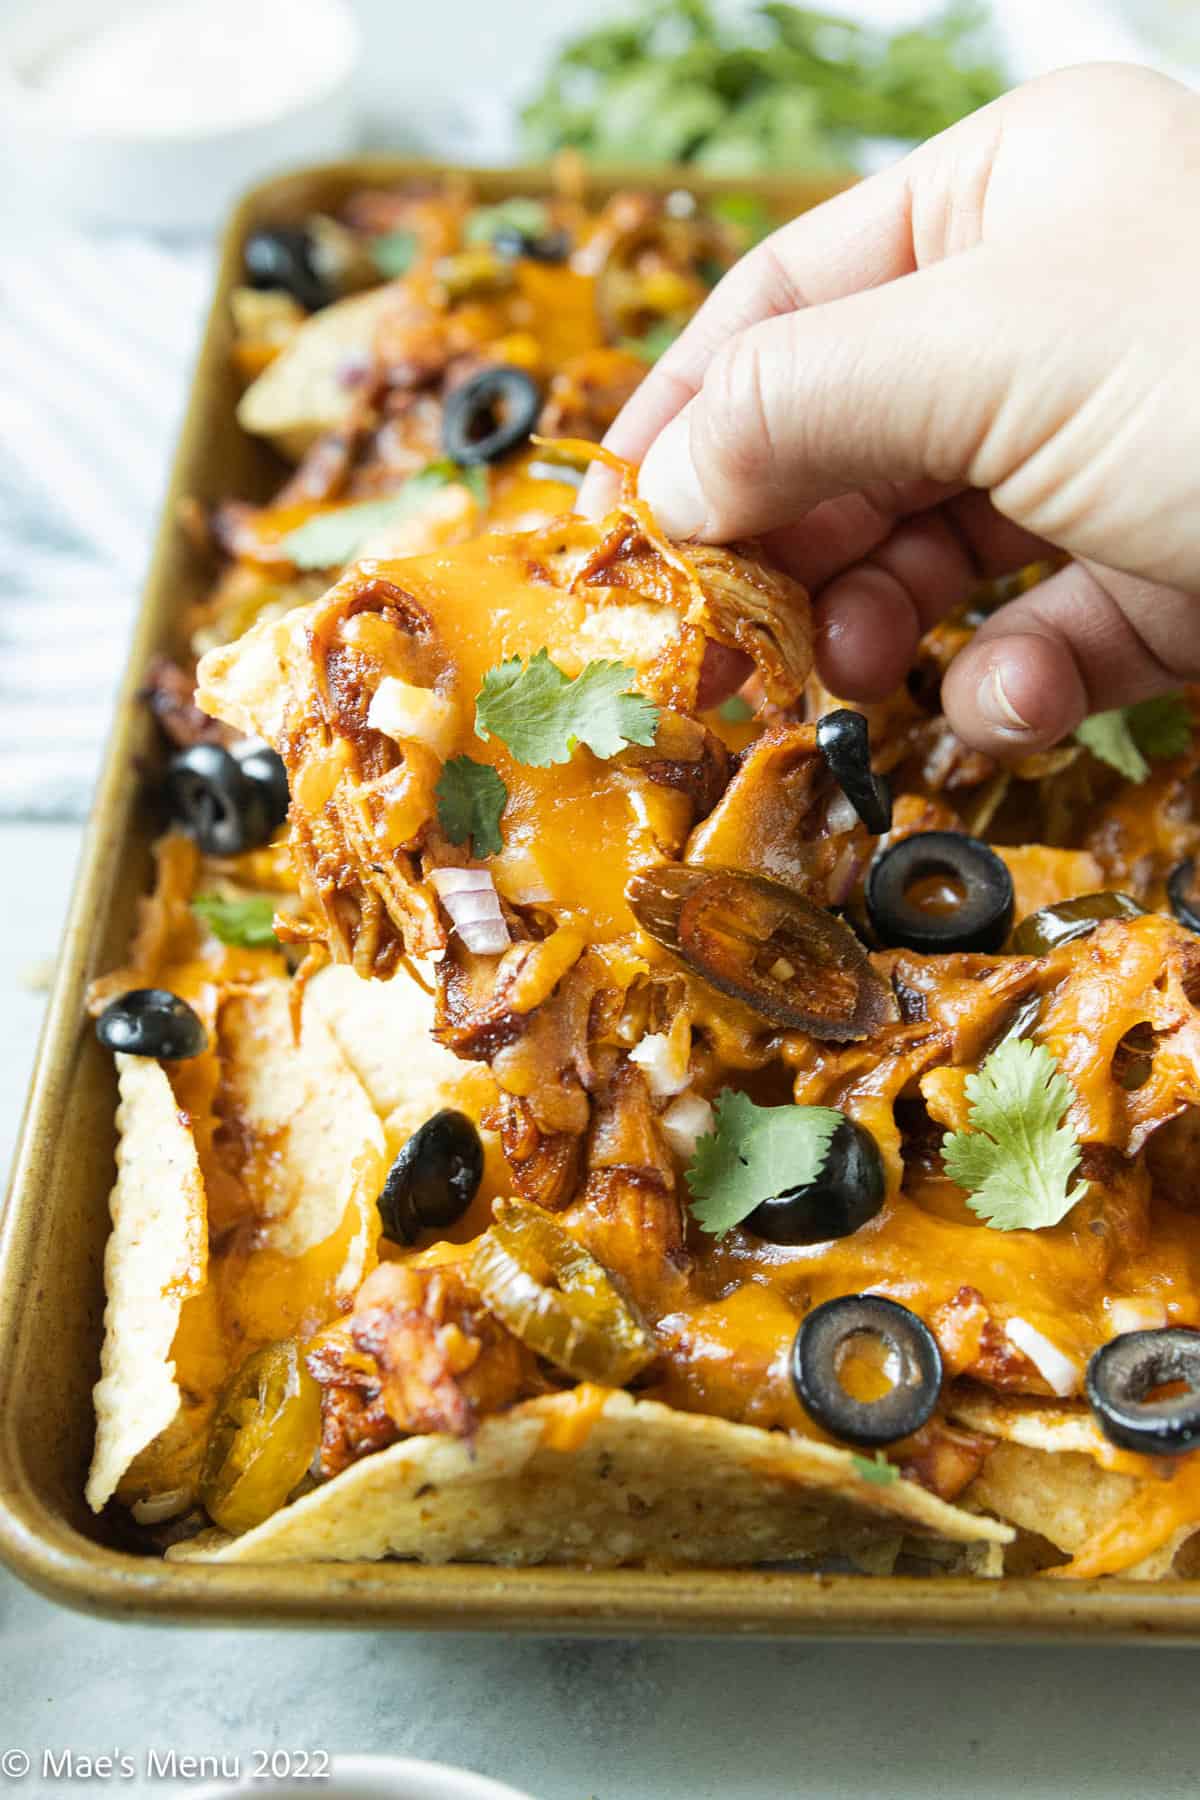 A hand grabbing some bbq chicken nachos from the tray.